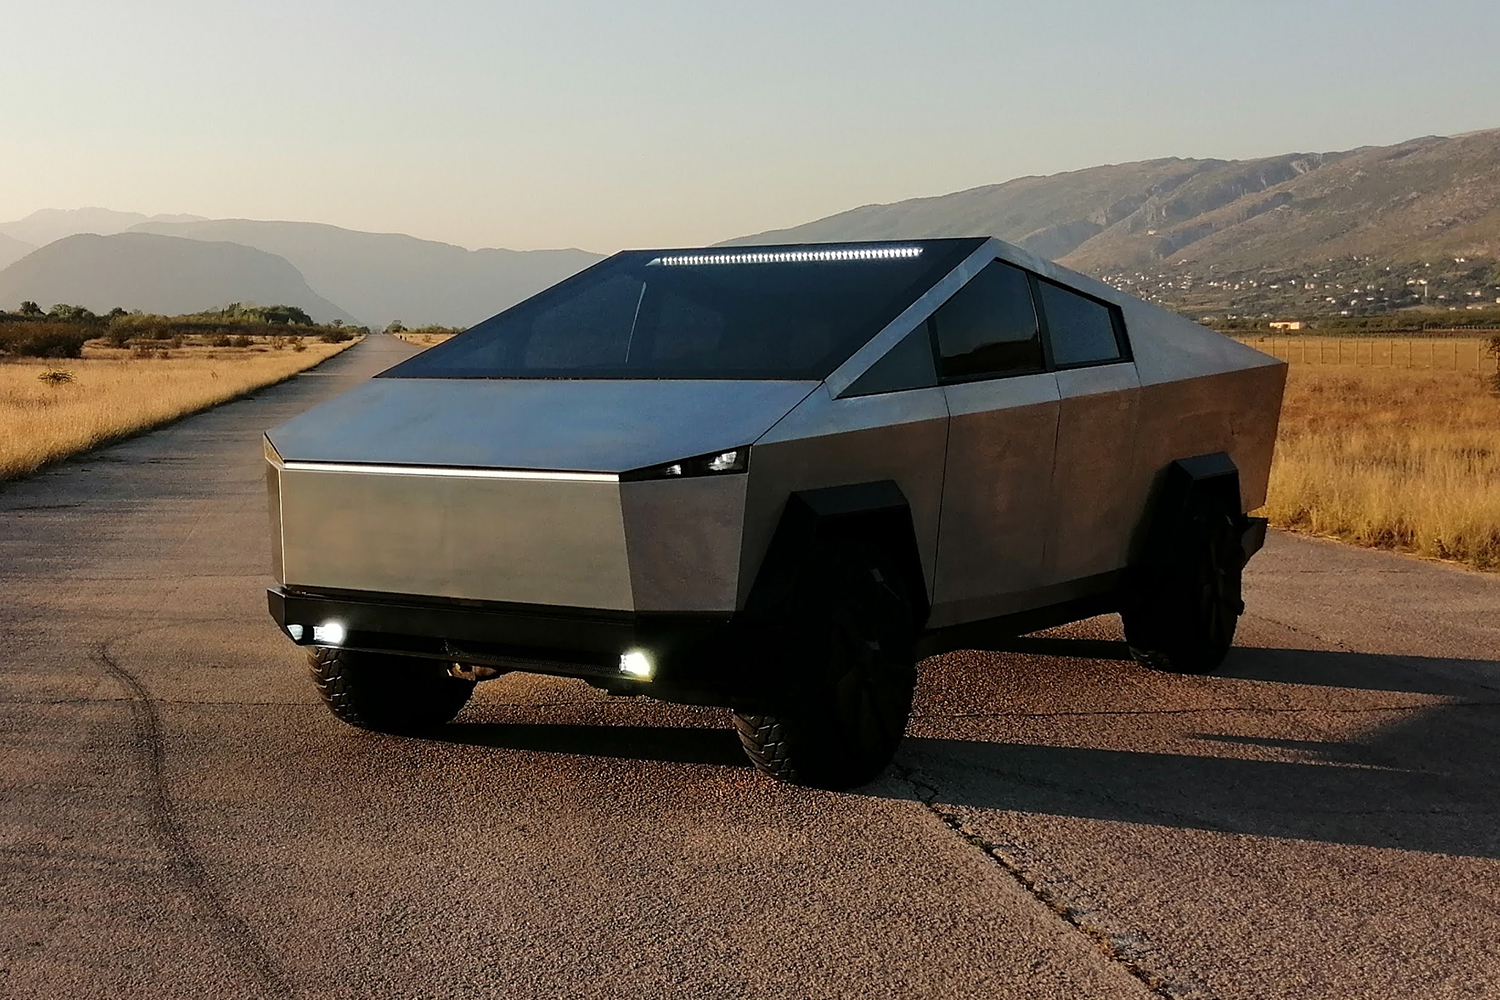 A Tesla Cybertruck replica based on a Ford F-150 Raptor that was built by the team at Stark Solutions in Bosnia and Herzegovina. We spoke with Stark employee Mario Coric about the vehicle and his boss, Igor Krezic, who commissioned it.